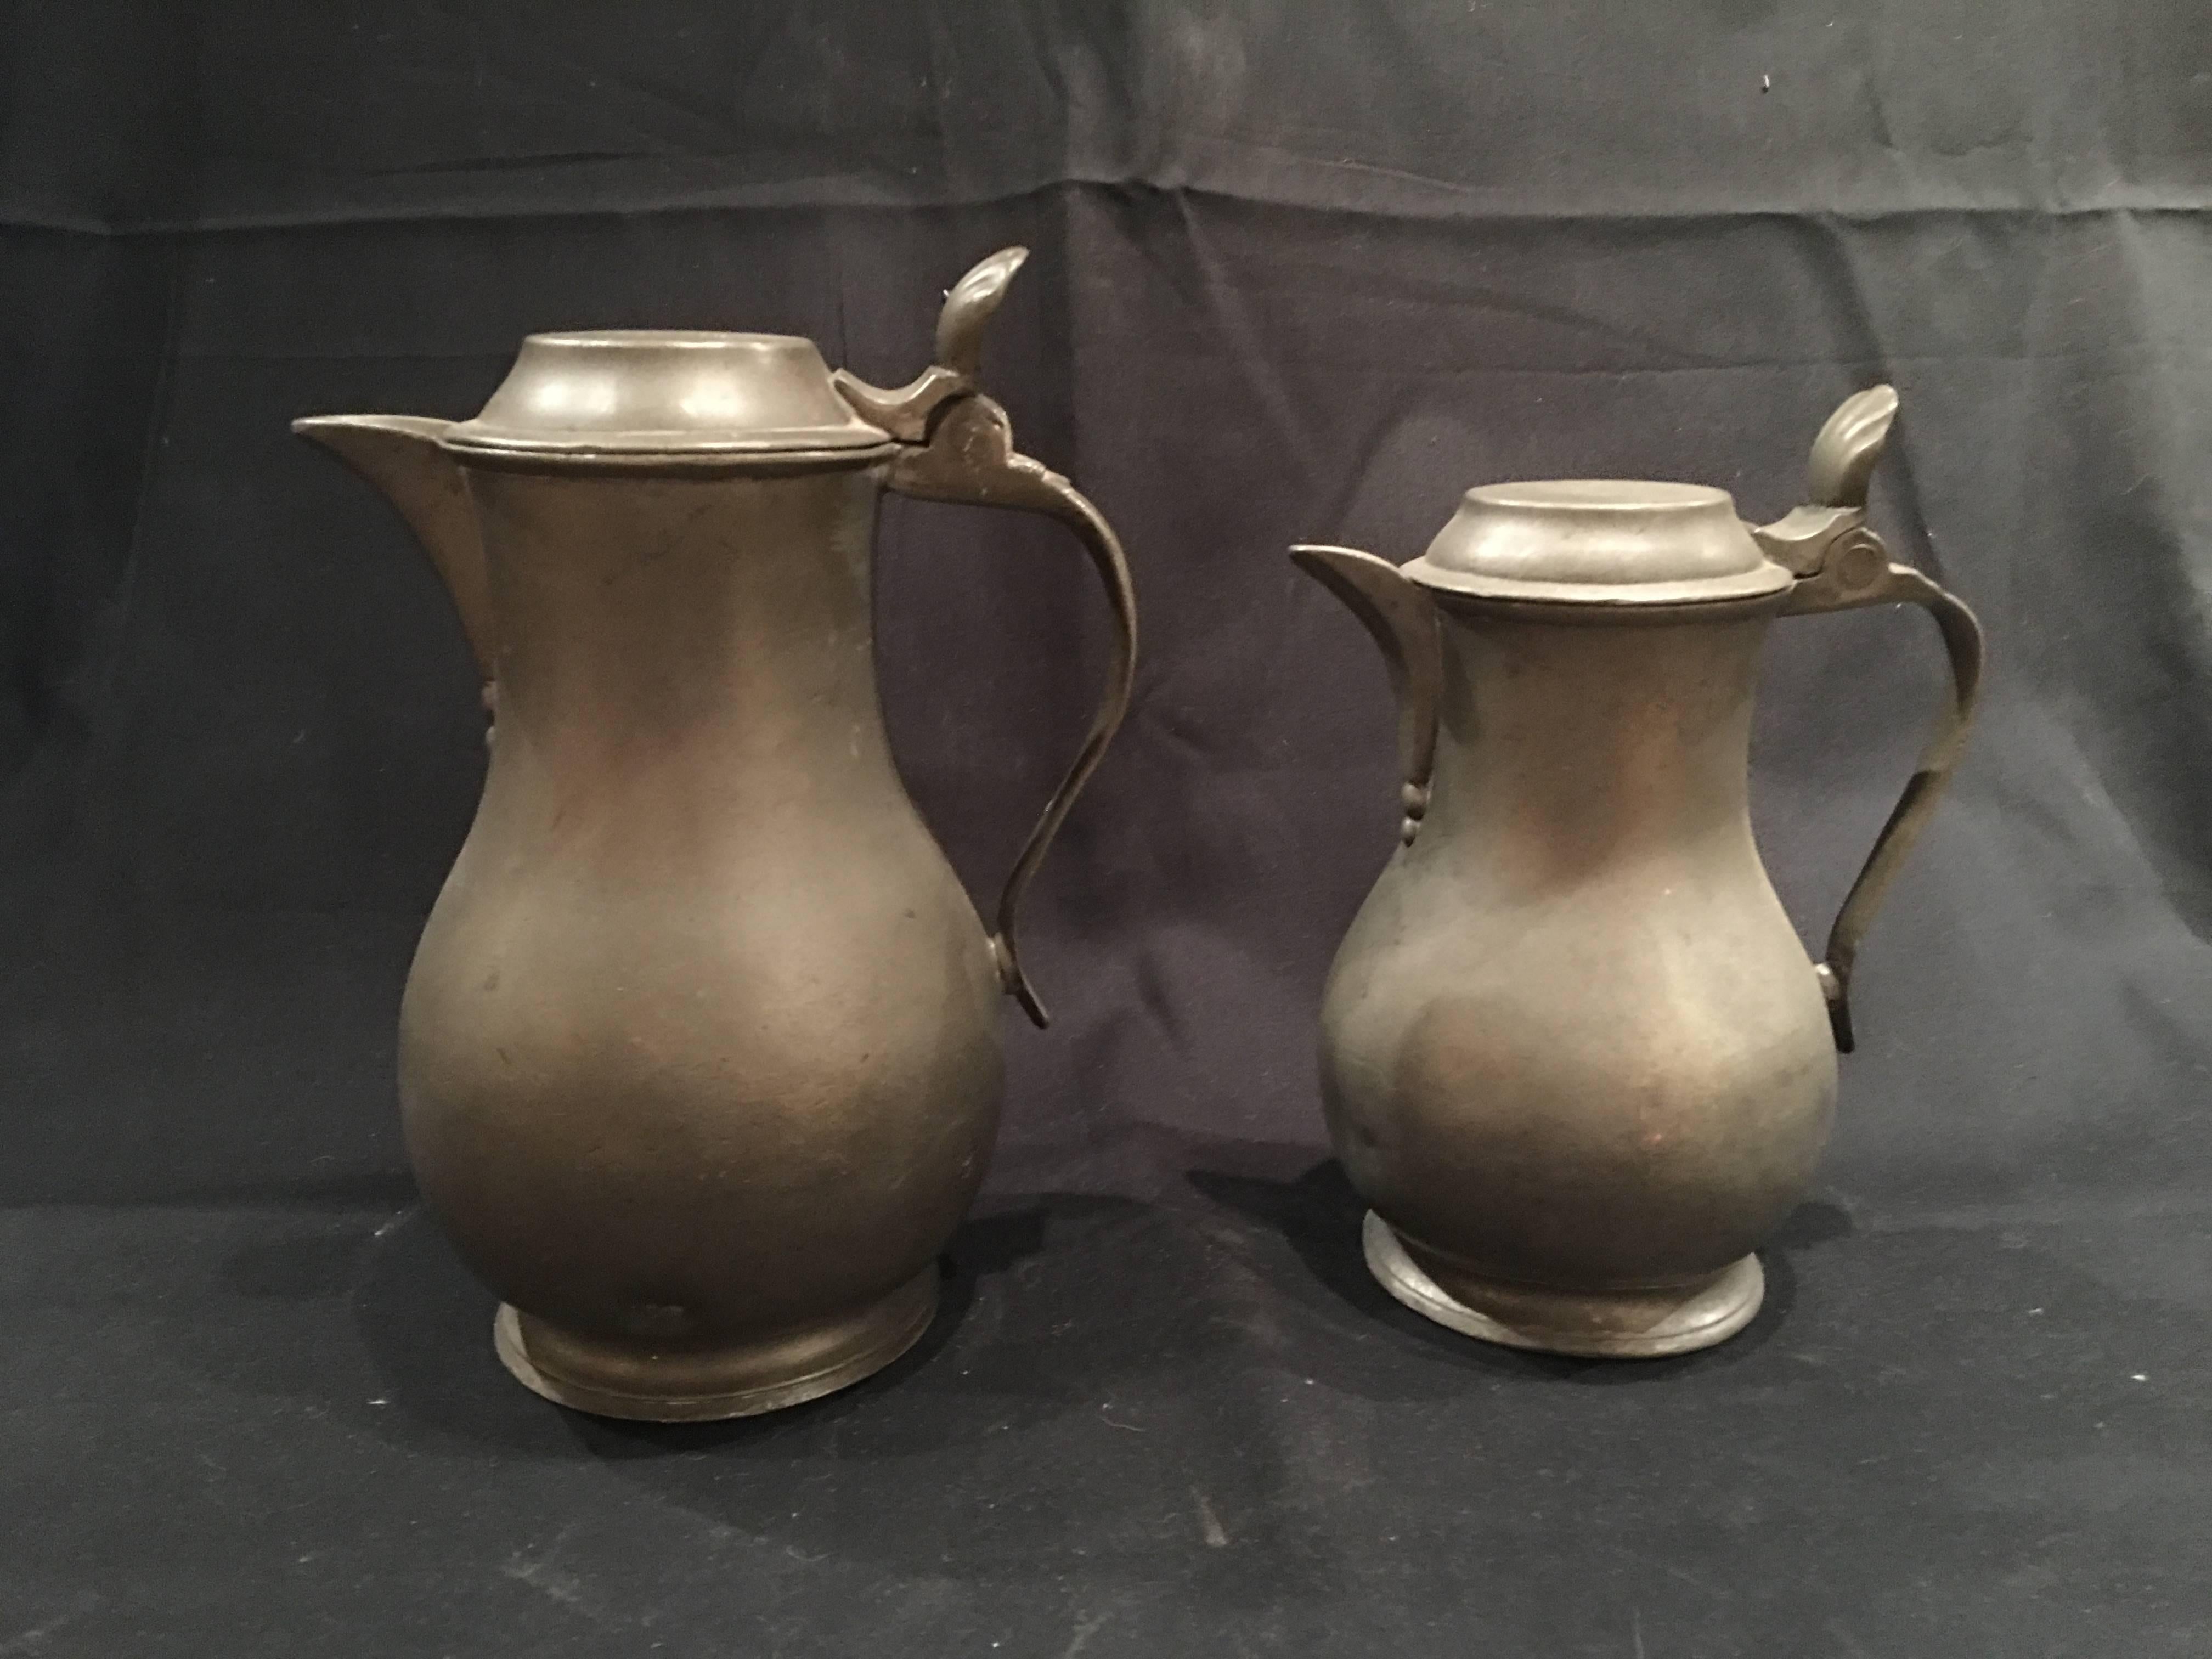 English pair of lidded Pewter jugs or tankards with handles, 19th century.